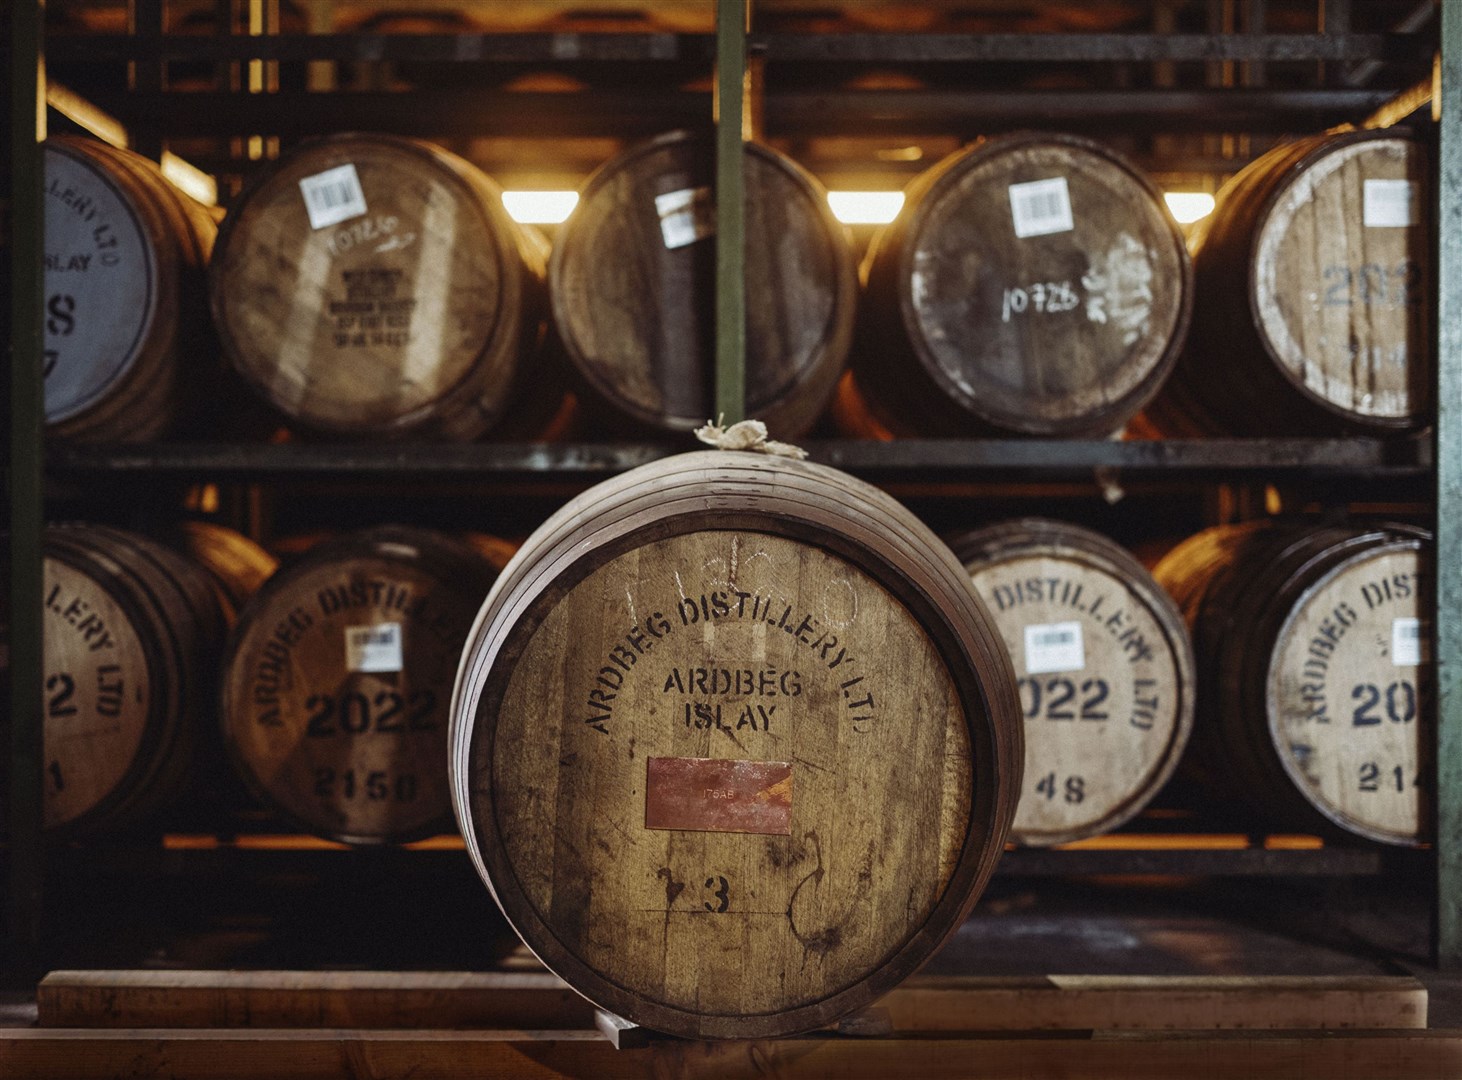 Ardbeg’s Cask No 3 has been sold for £16 million (Ardbeg Islay/PA)